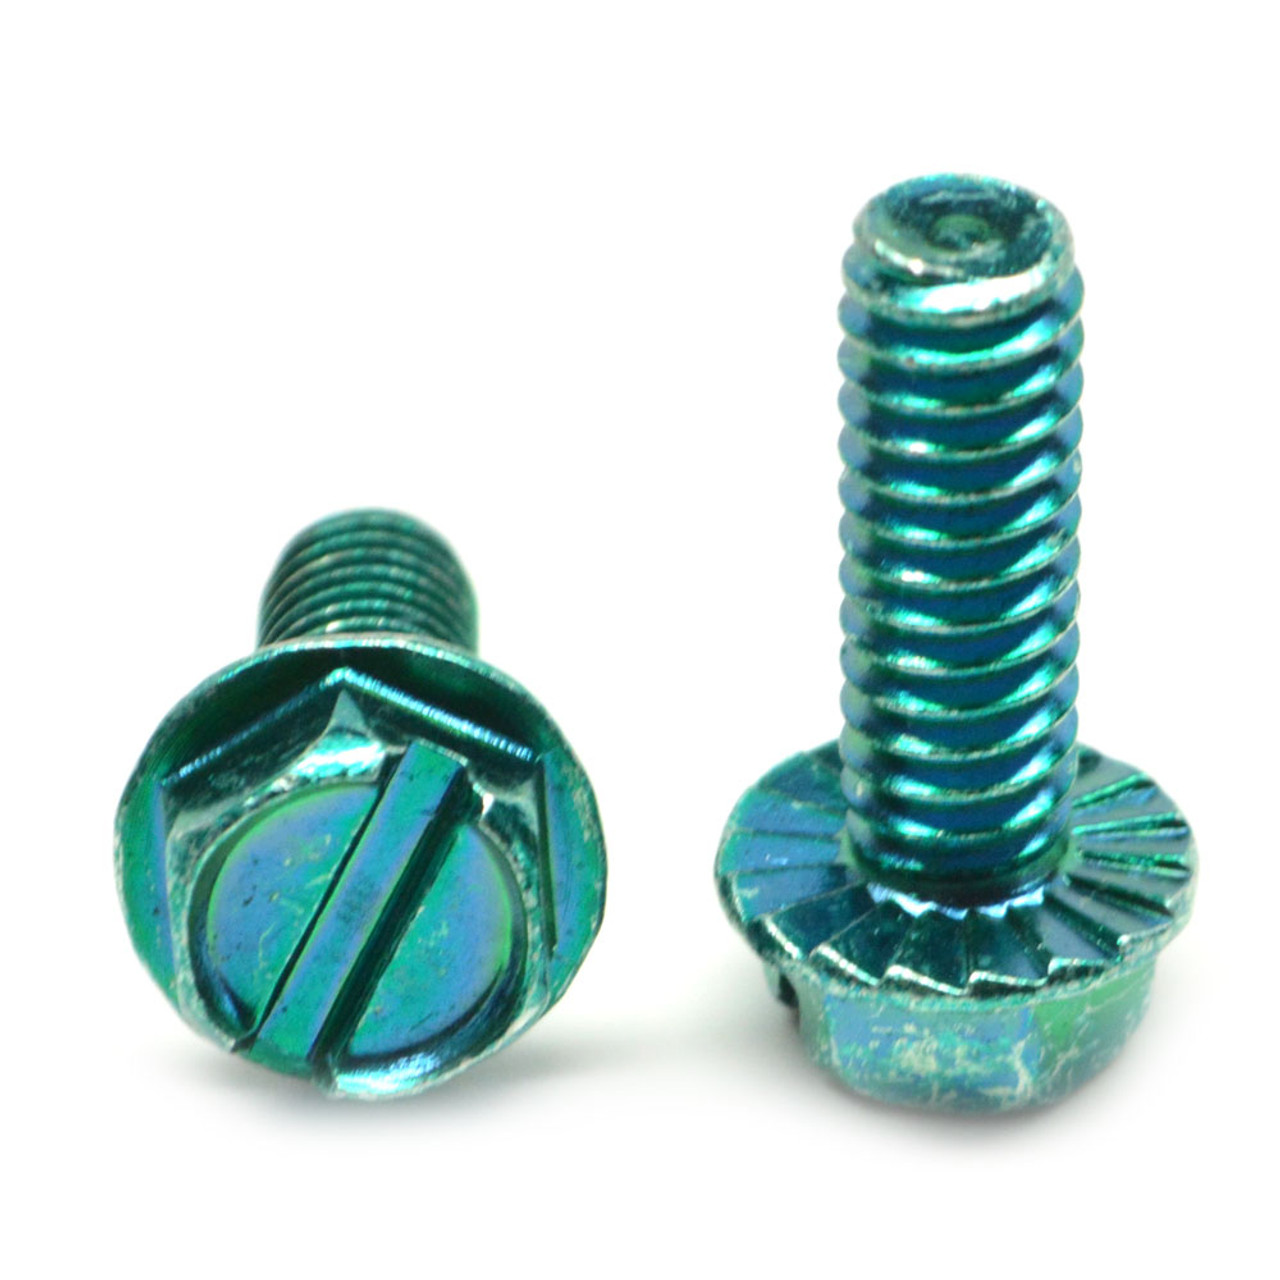 #8-32 x 1/4" (FT) Coarse Thread Machine Screw Slotted Hex Washer Head with Serration Low Carbon Steel Green Zinc Plated